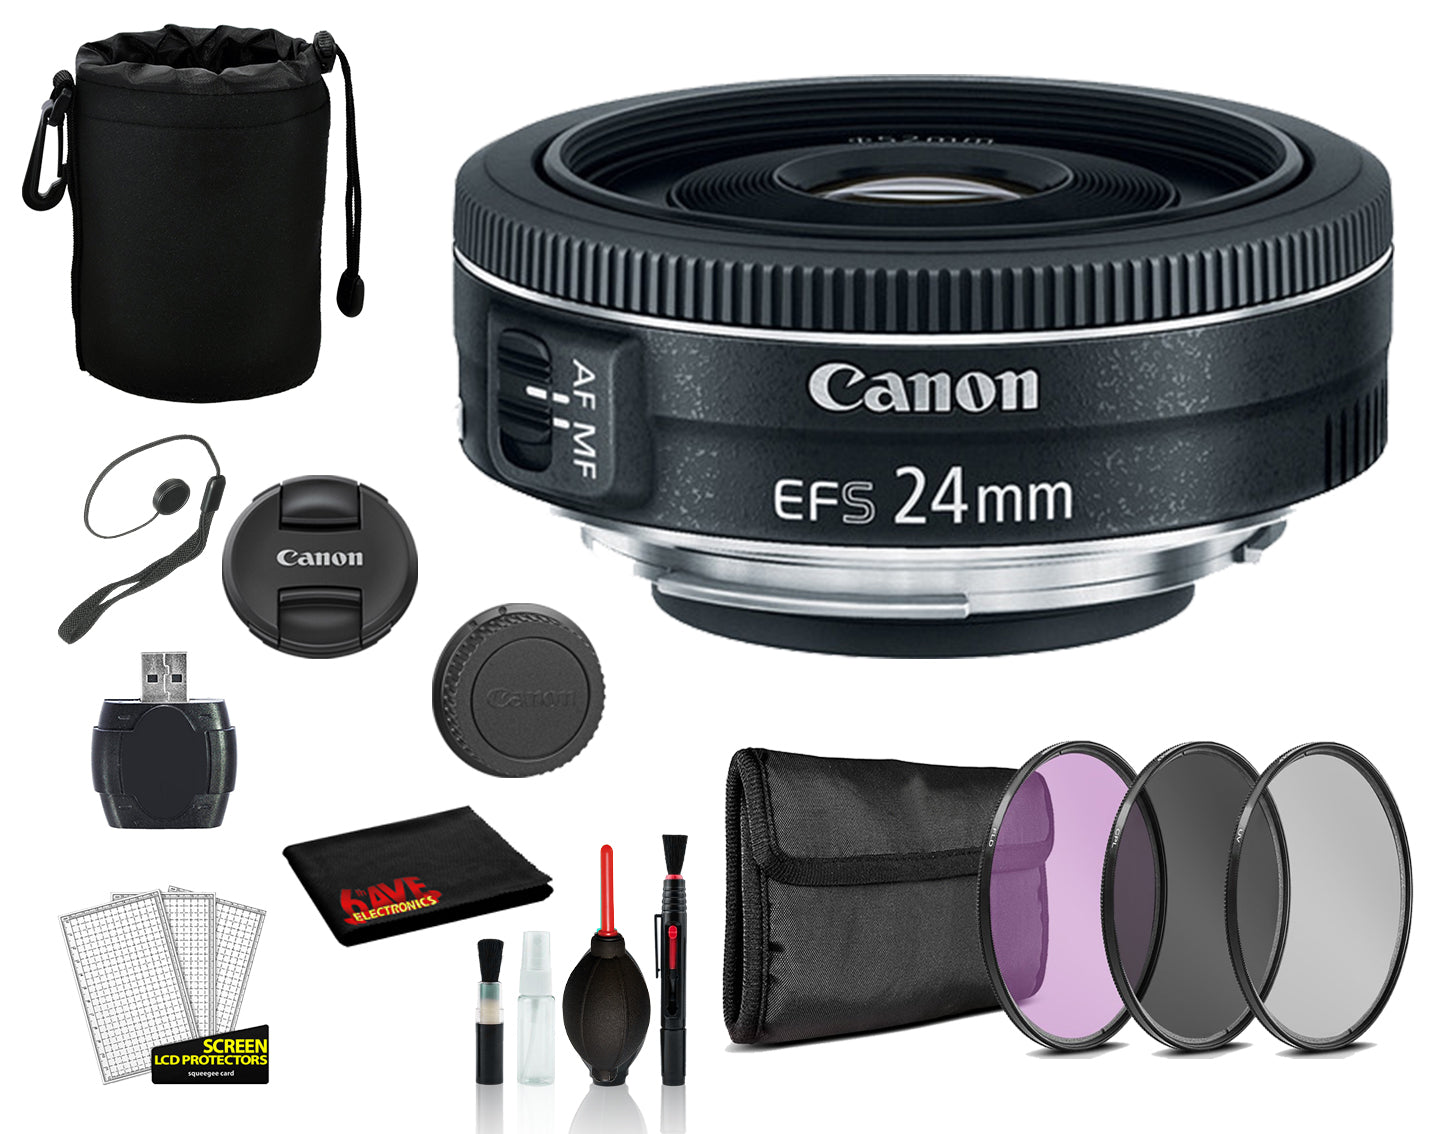 Canon EF-S 24mm f/2.8 STM Lens  (9522B002) Lens with Bundle  includes 3pc Filter Kit (UV, CPL, FLD) + Lens Pouch + More